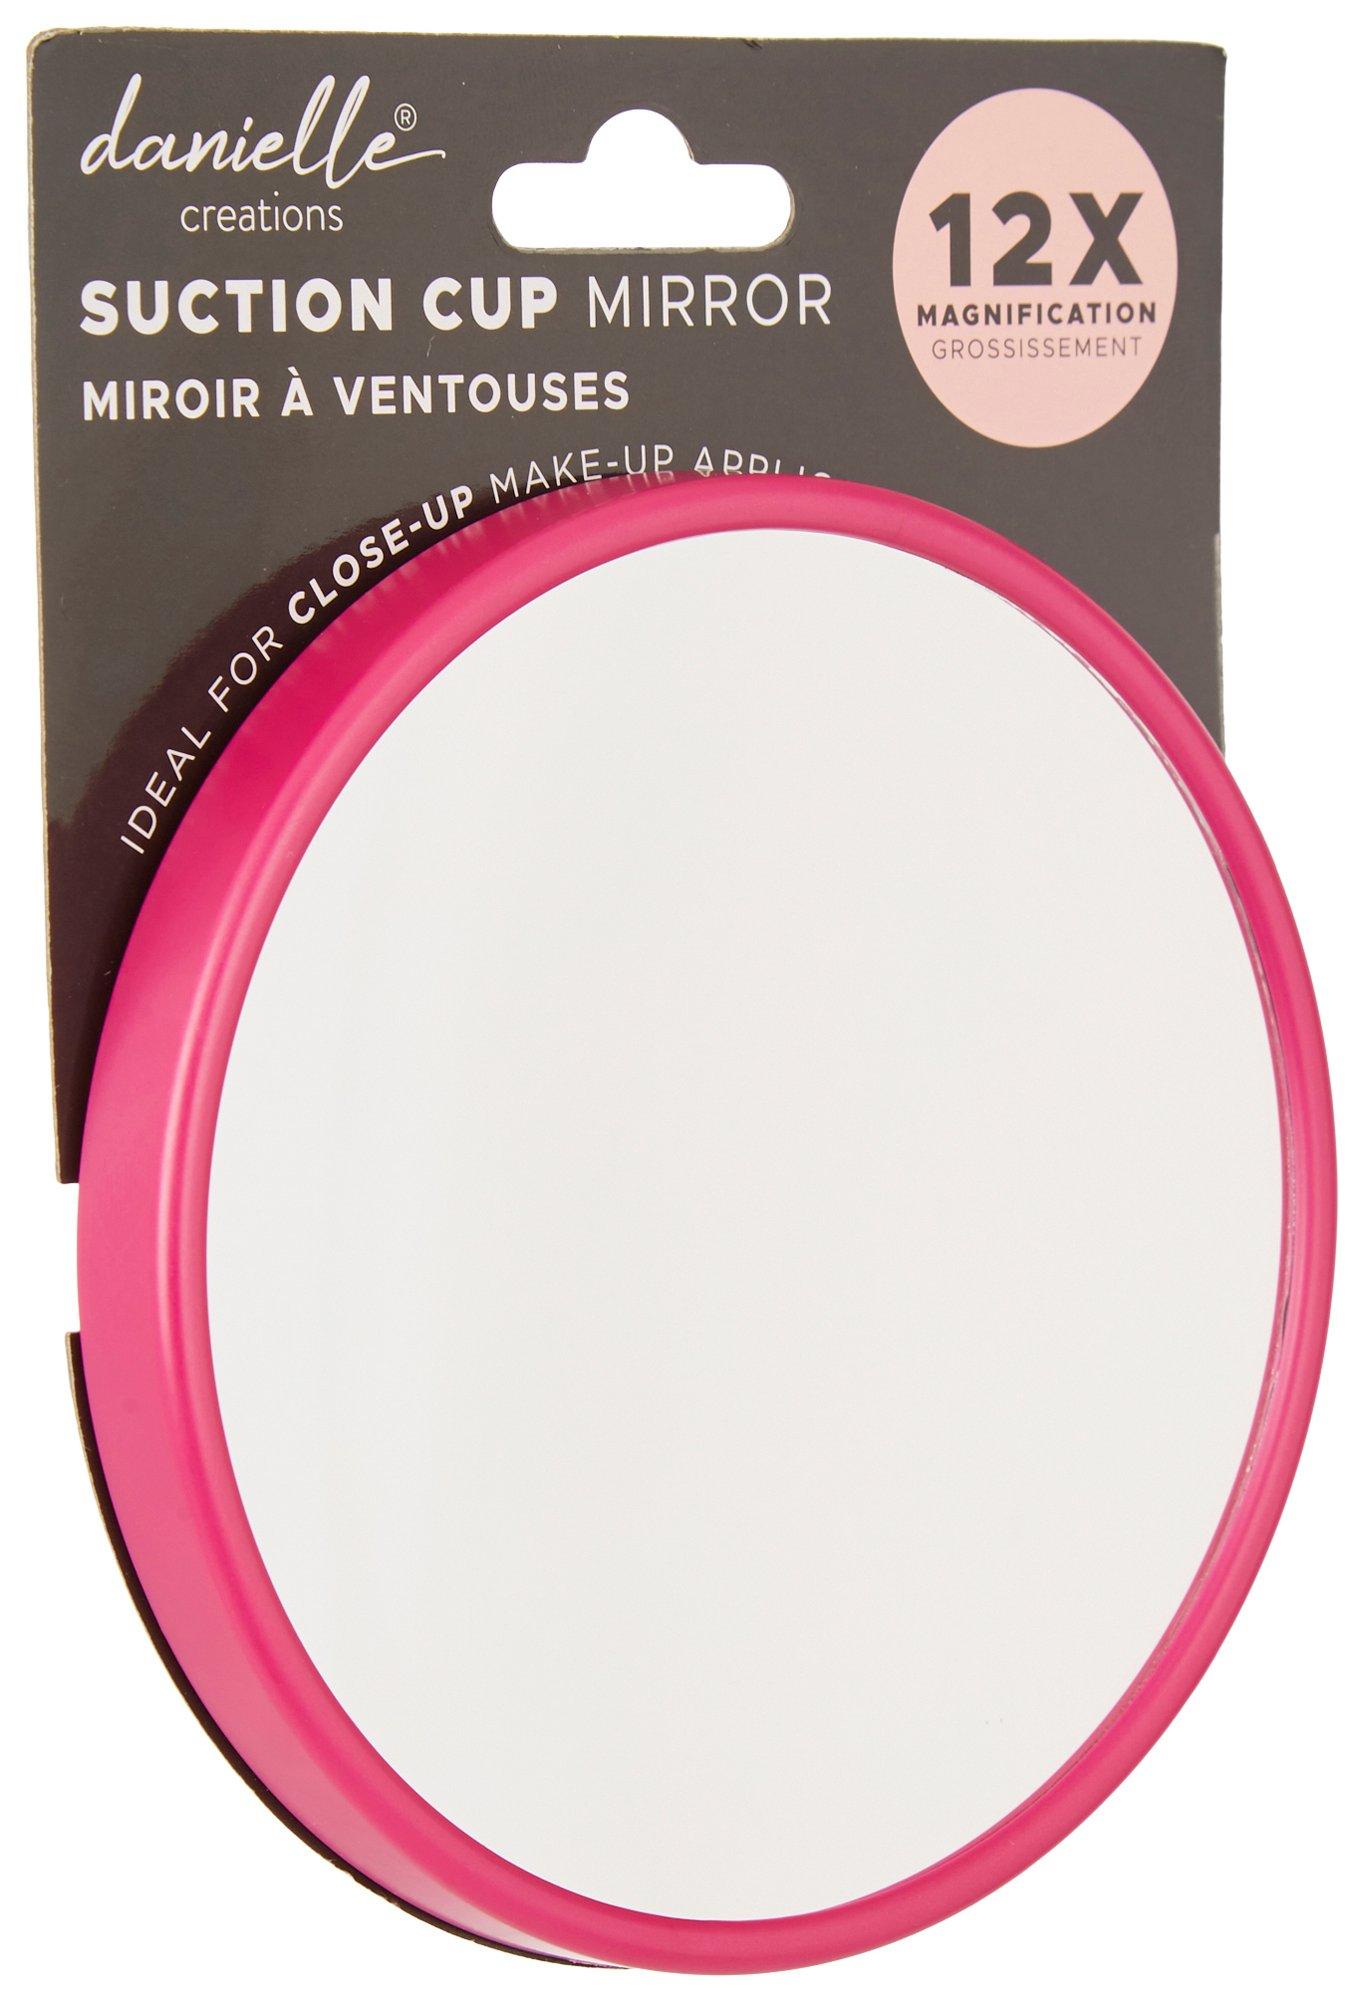 Danielle Suction Cup 12x Magnification Mirror